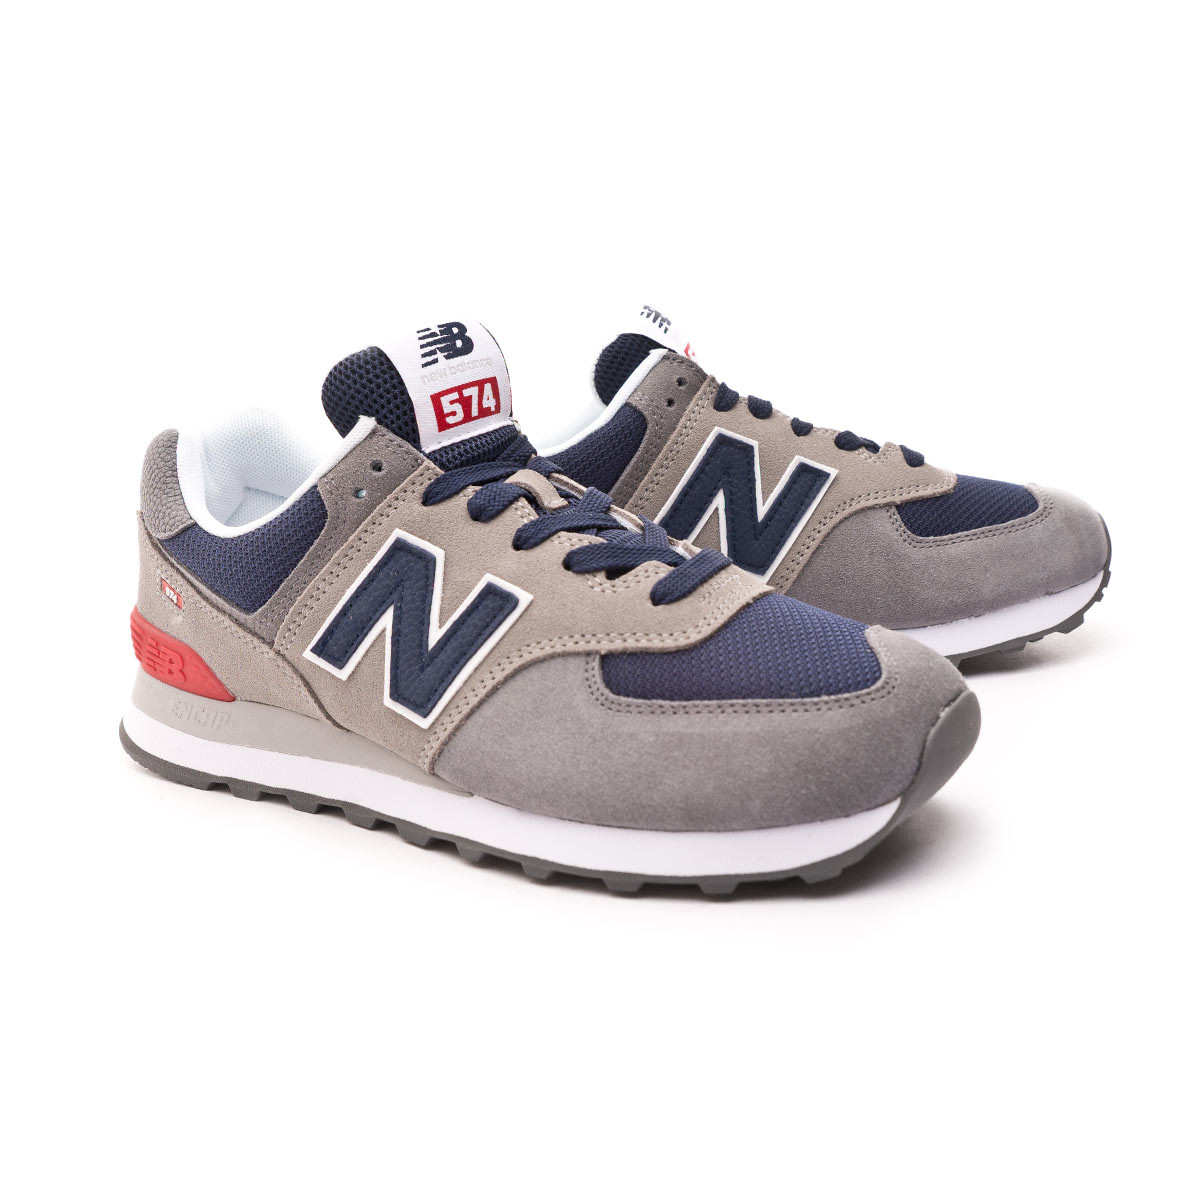 574 V2 New Balance On Sale, UP TO 65% OFF